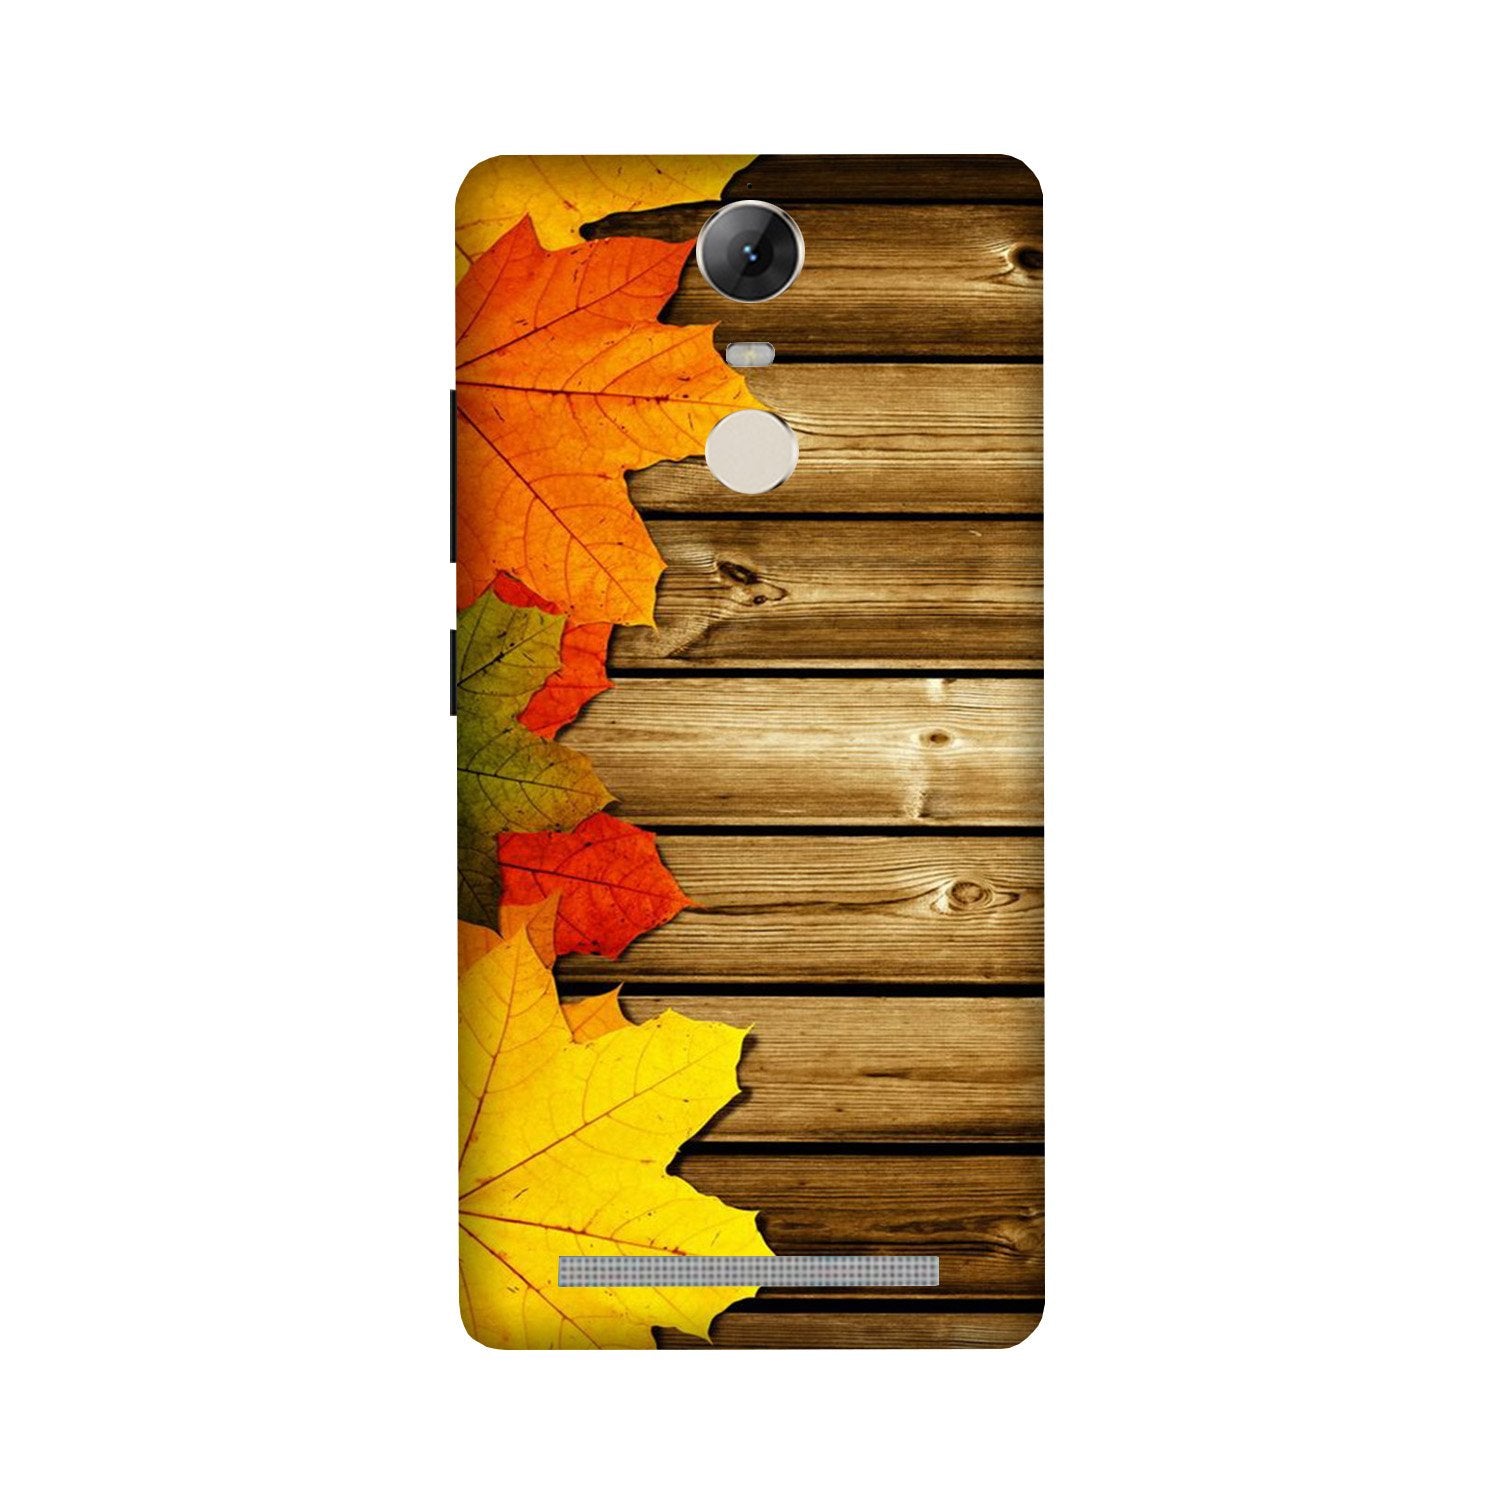 Wooden look3 Case for Lenovo Vibe K5 Note